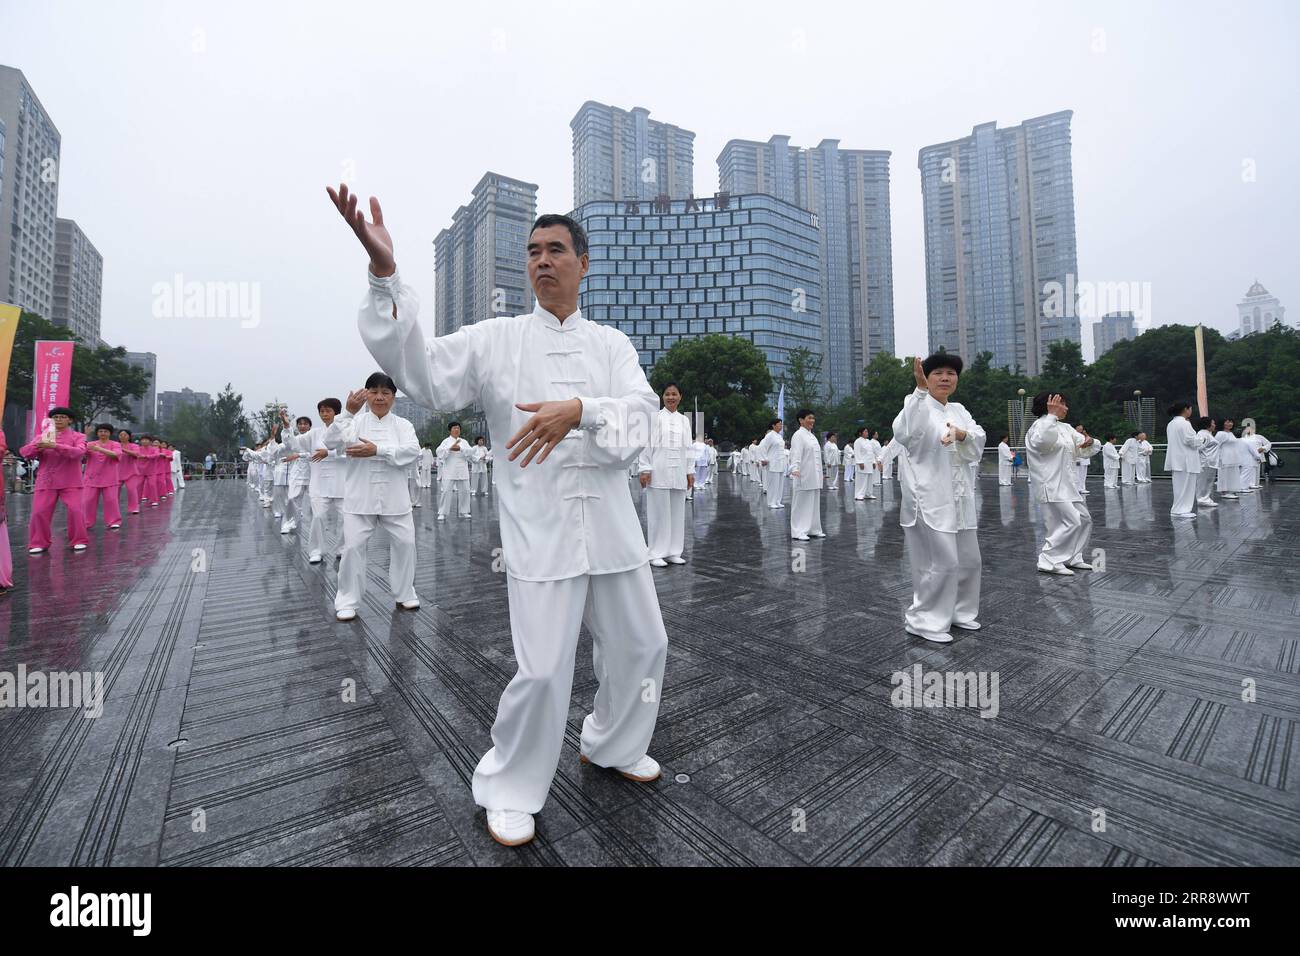 210519 -- TONGLU, May 19, 2021 -- Senior hobbyists of Taijiquan, a traditional Chinese martial art, demonstrate Taijiquan moves by Fuchunjiang River in Tonglu County, east China s Zhejiang Province, on May 19, 2021. A nation-wide campaign to promote and demonstrate Taijiquan as a fitness exercise among senior citizens was launched here on Wednesday. More than 2,000 Taijiquan hobbyists from all over the country flocked in to participate in the demonstrations and performances.  CHINA-ZHEJIANG-TONGLU-TAIJIQUAN FITNESS EXERCISESCN XuxYu PUBLICATIONxNOTxINxCHN Stock Photo